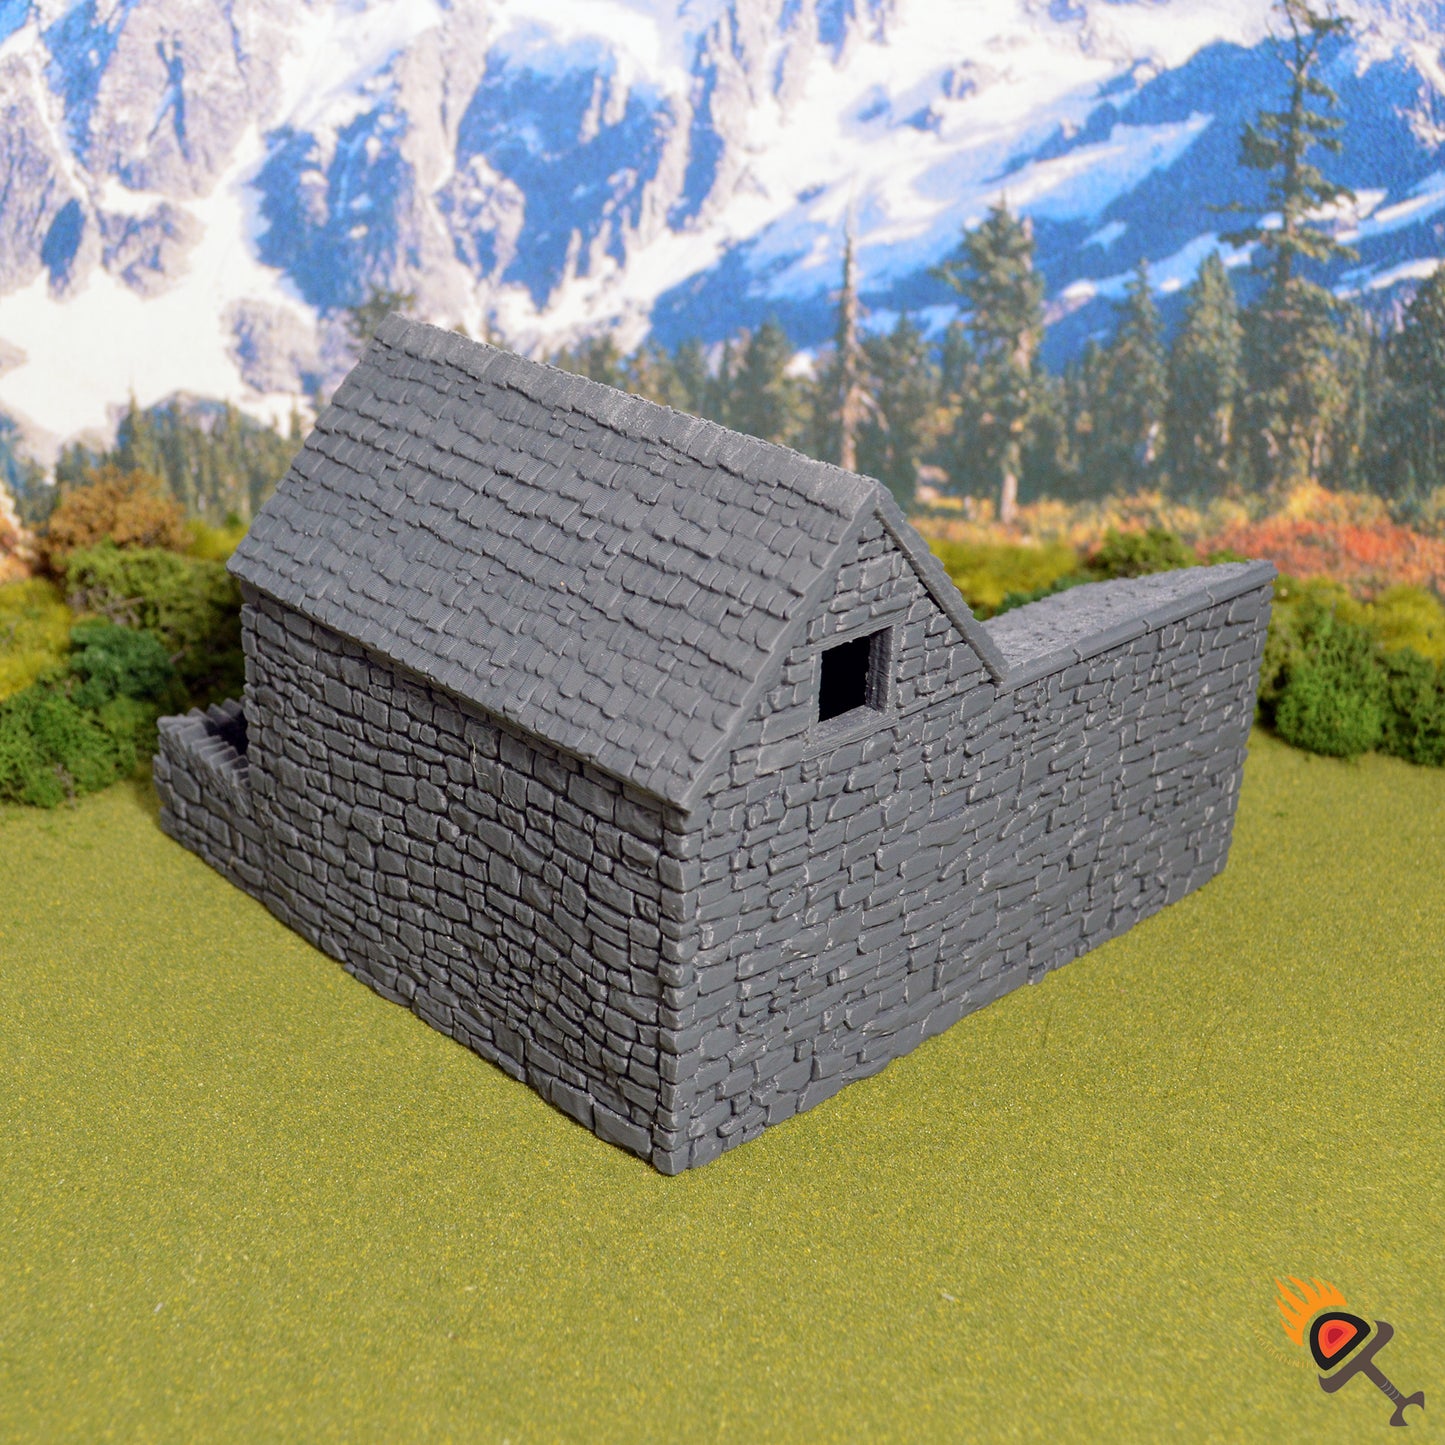 Miniature Farm Pig Pen for DnD Terrain 15mm 28mm 32mm, Pigsty for D&D Pathfinder Medieval Village, King and Country Hog Pen